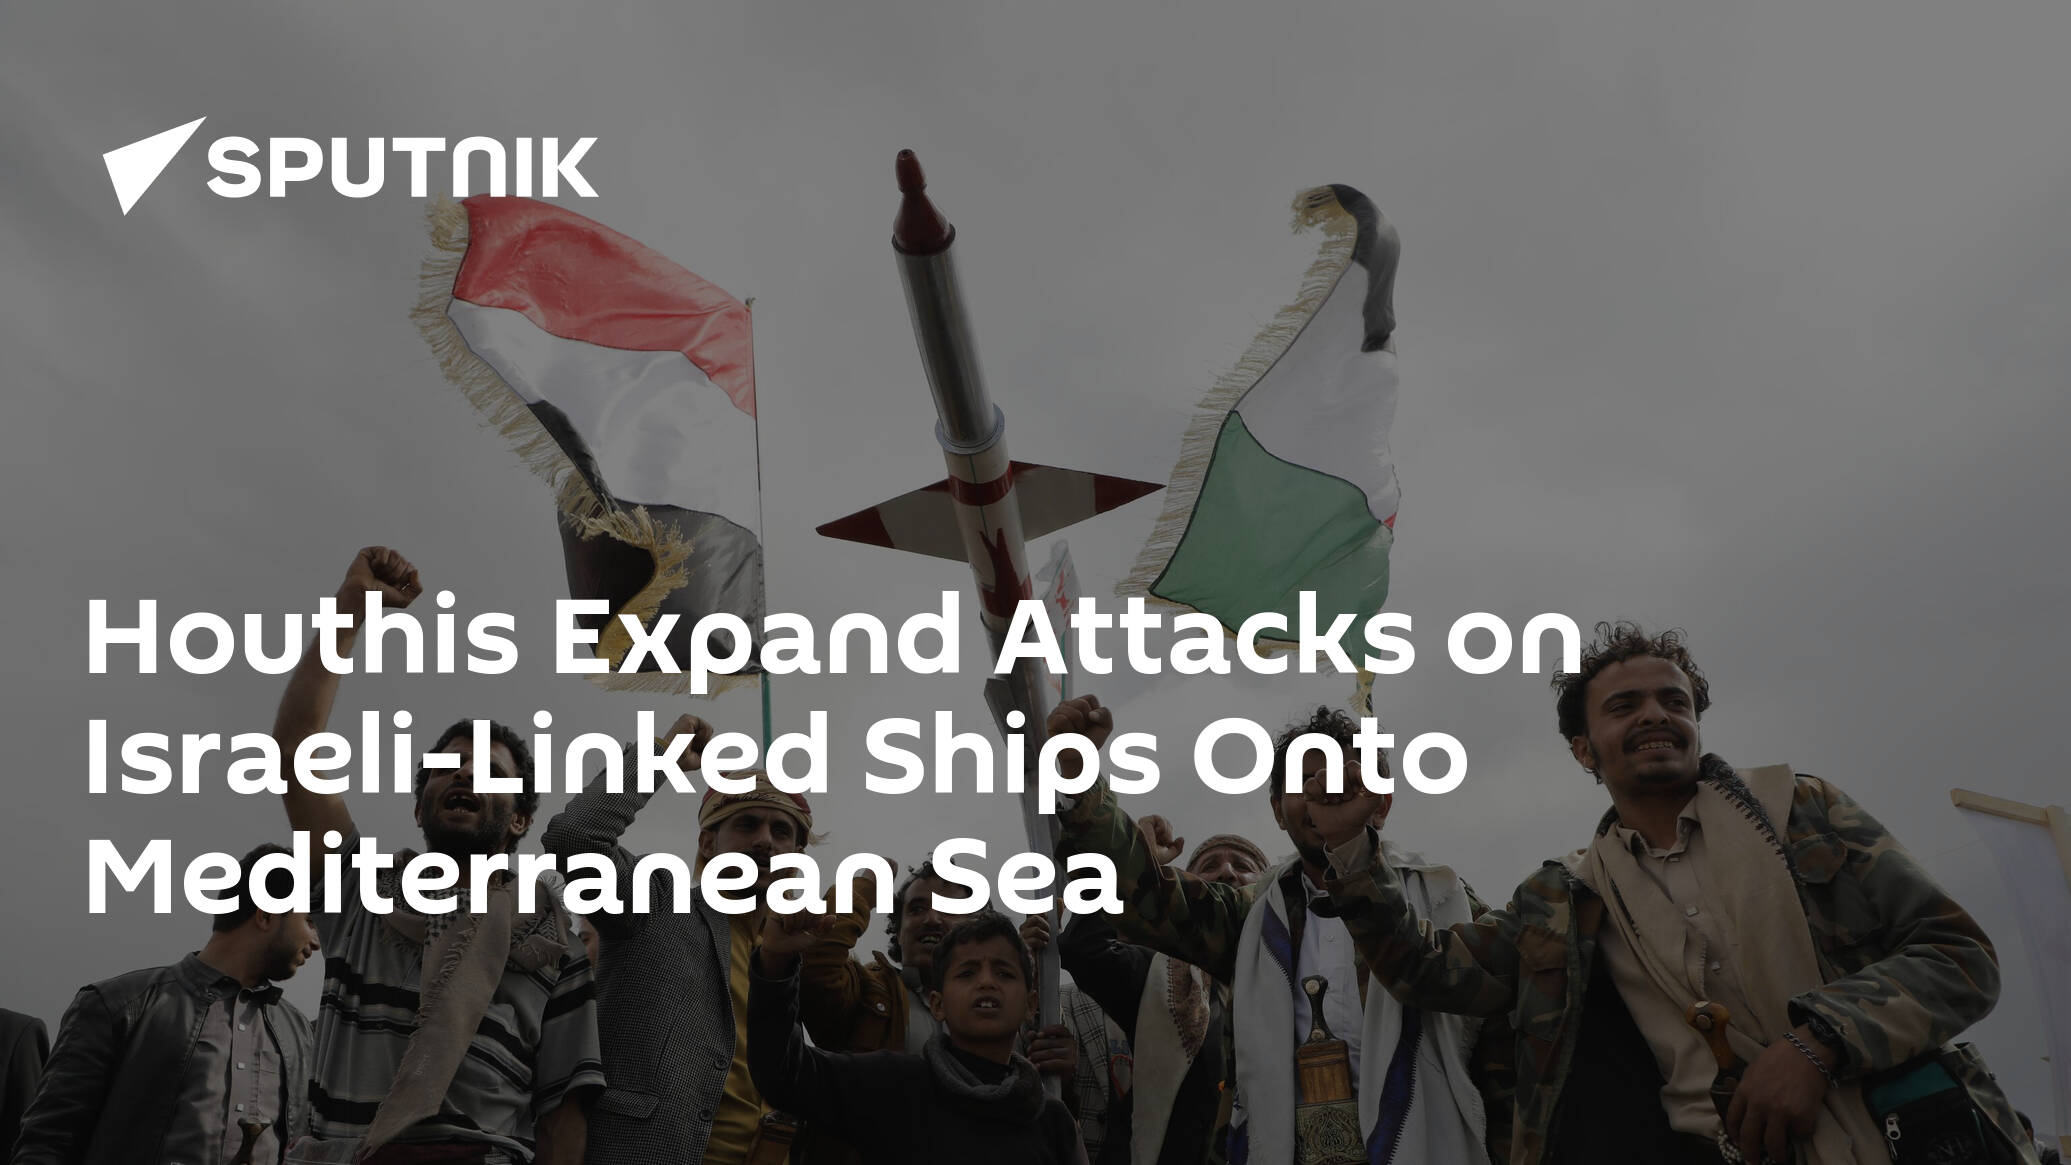 Houthis Expand Attacks on Israeli-Linked Ships Onto Mediterranean Sea